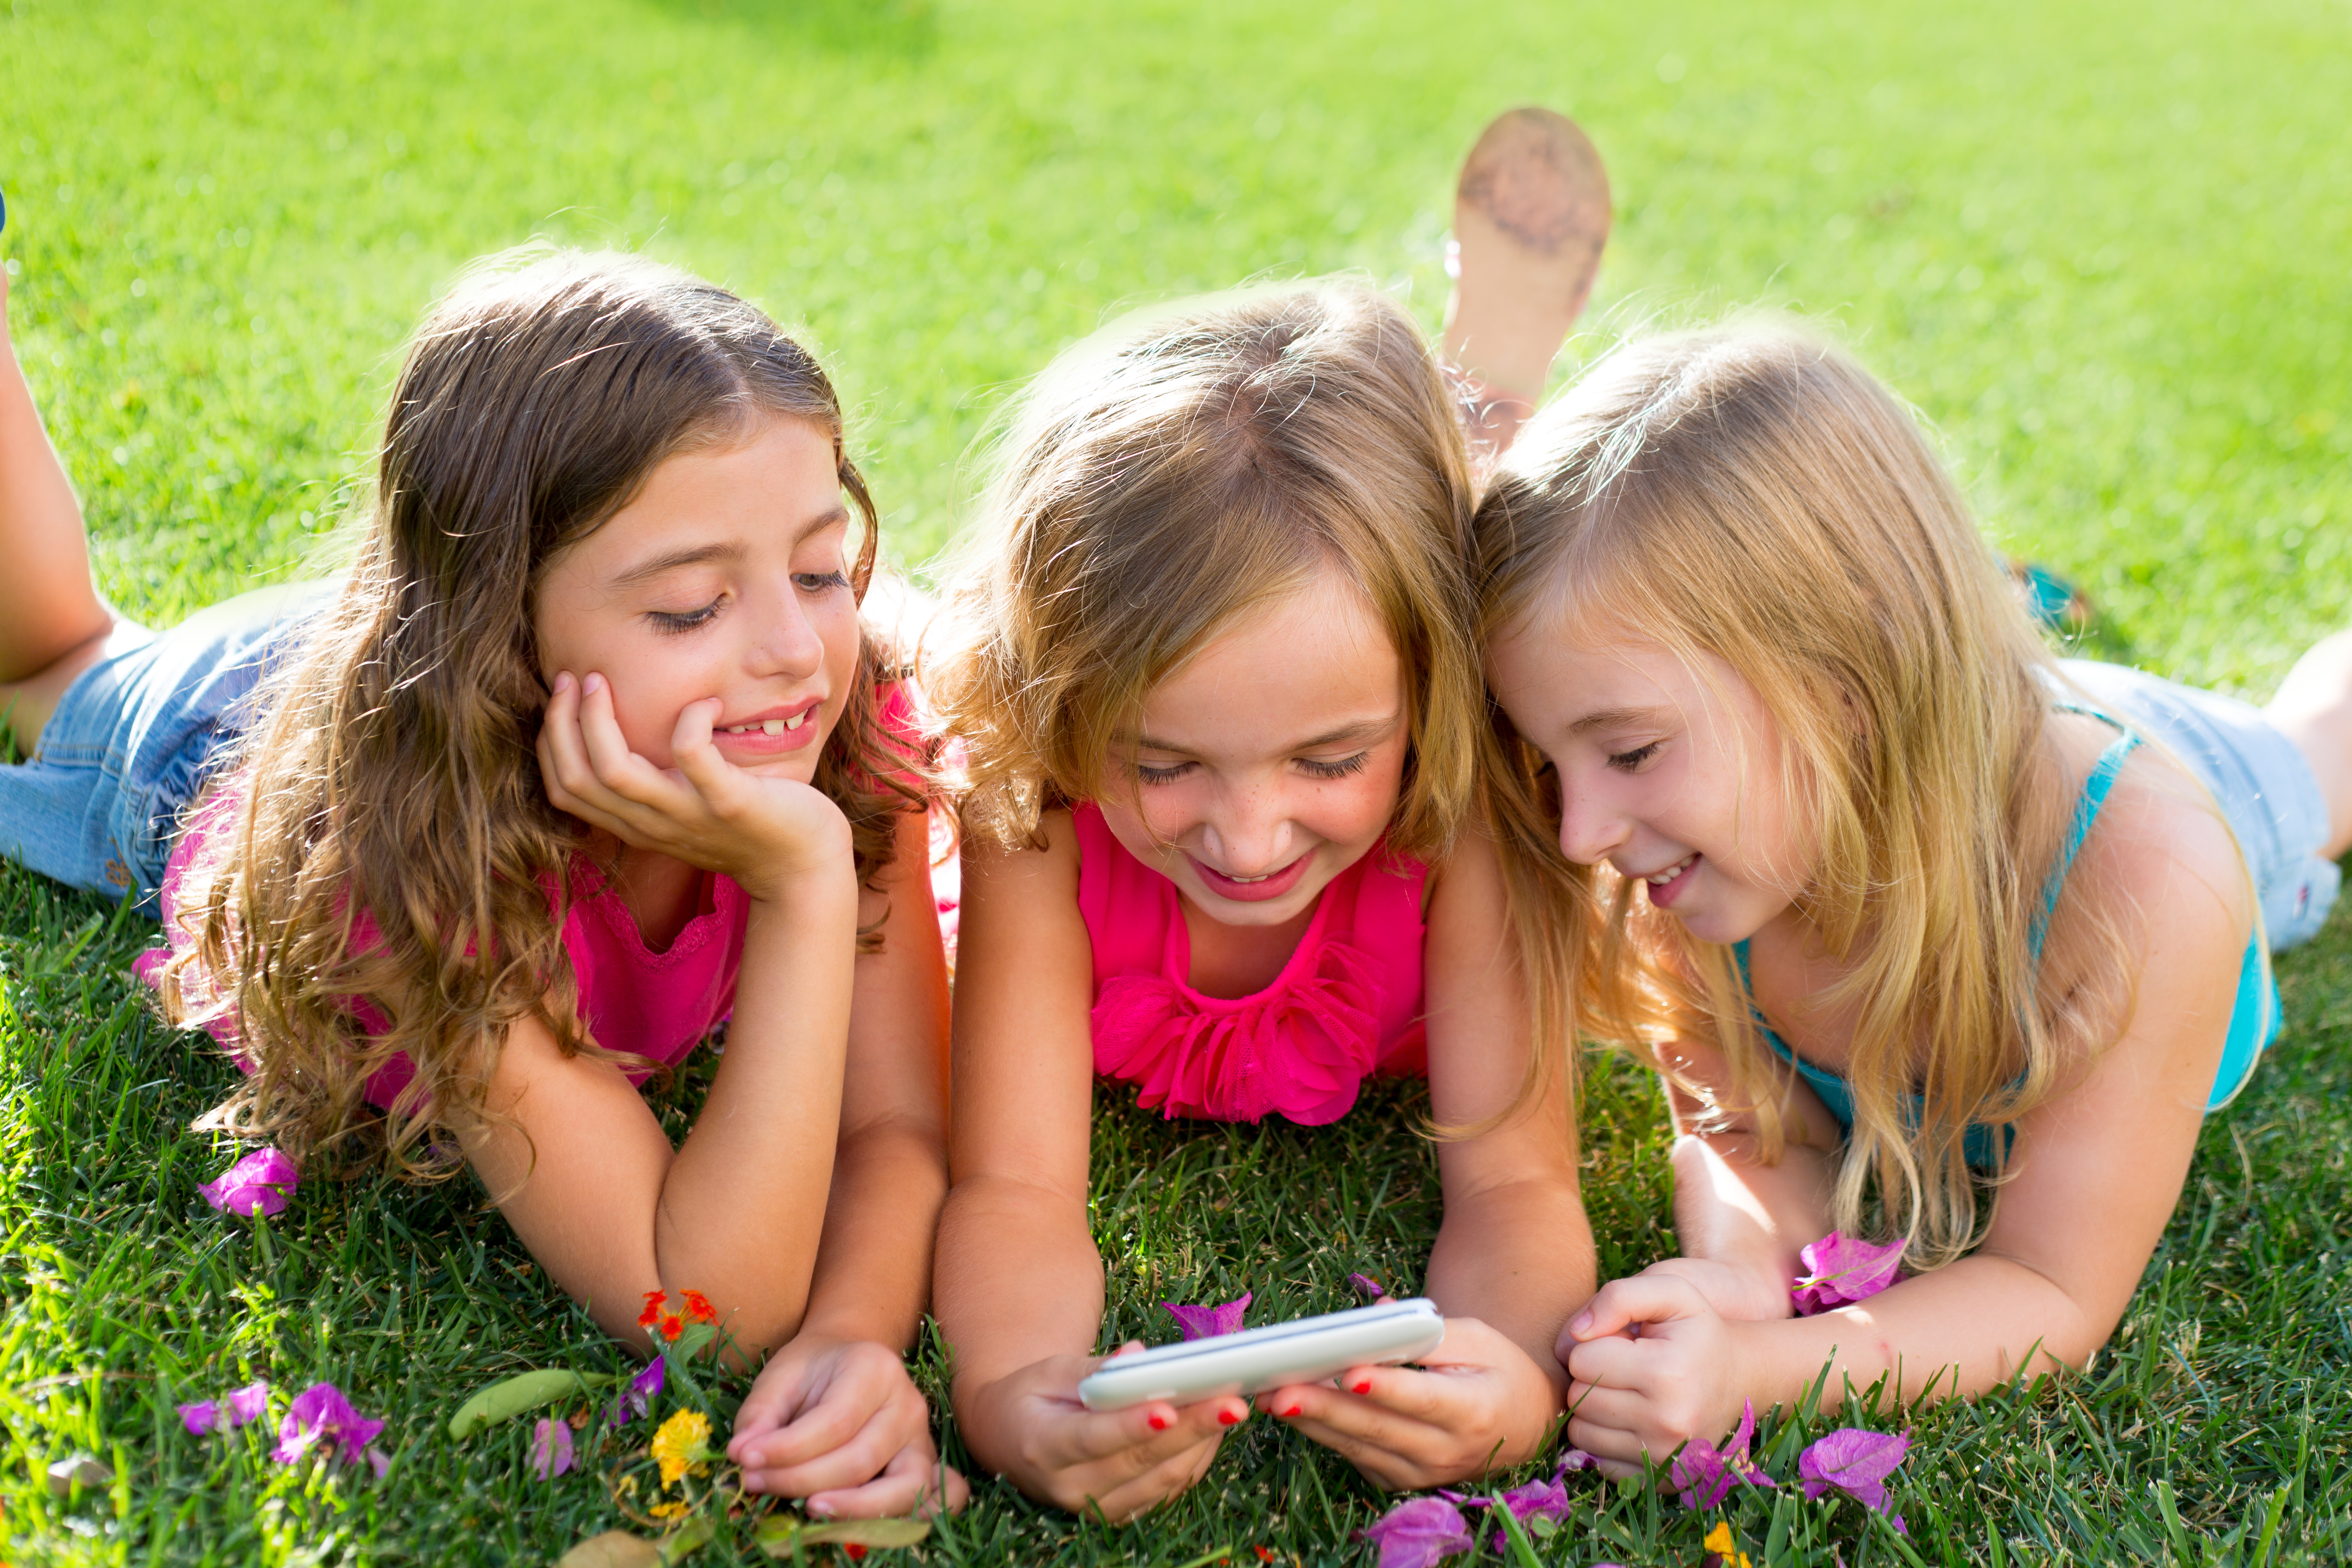 Three girls are lying on the grass and looking at a mobile phone.